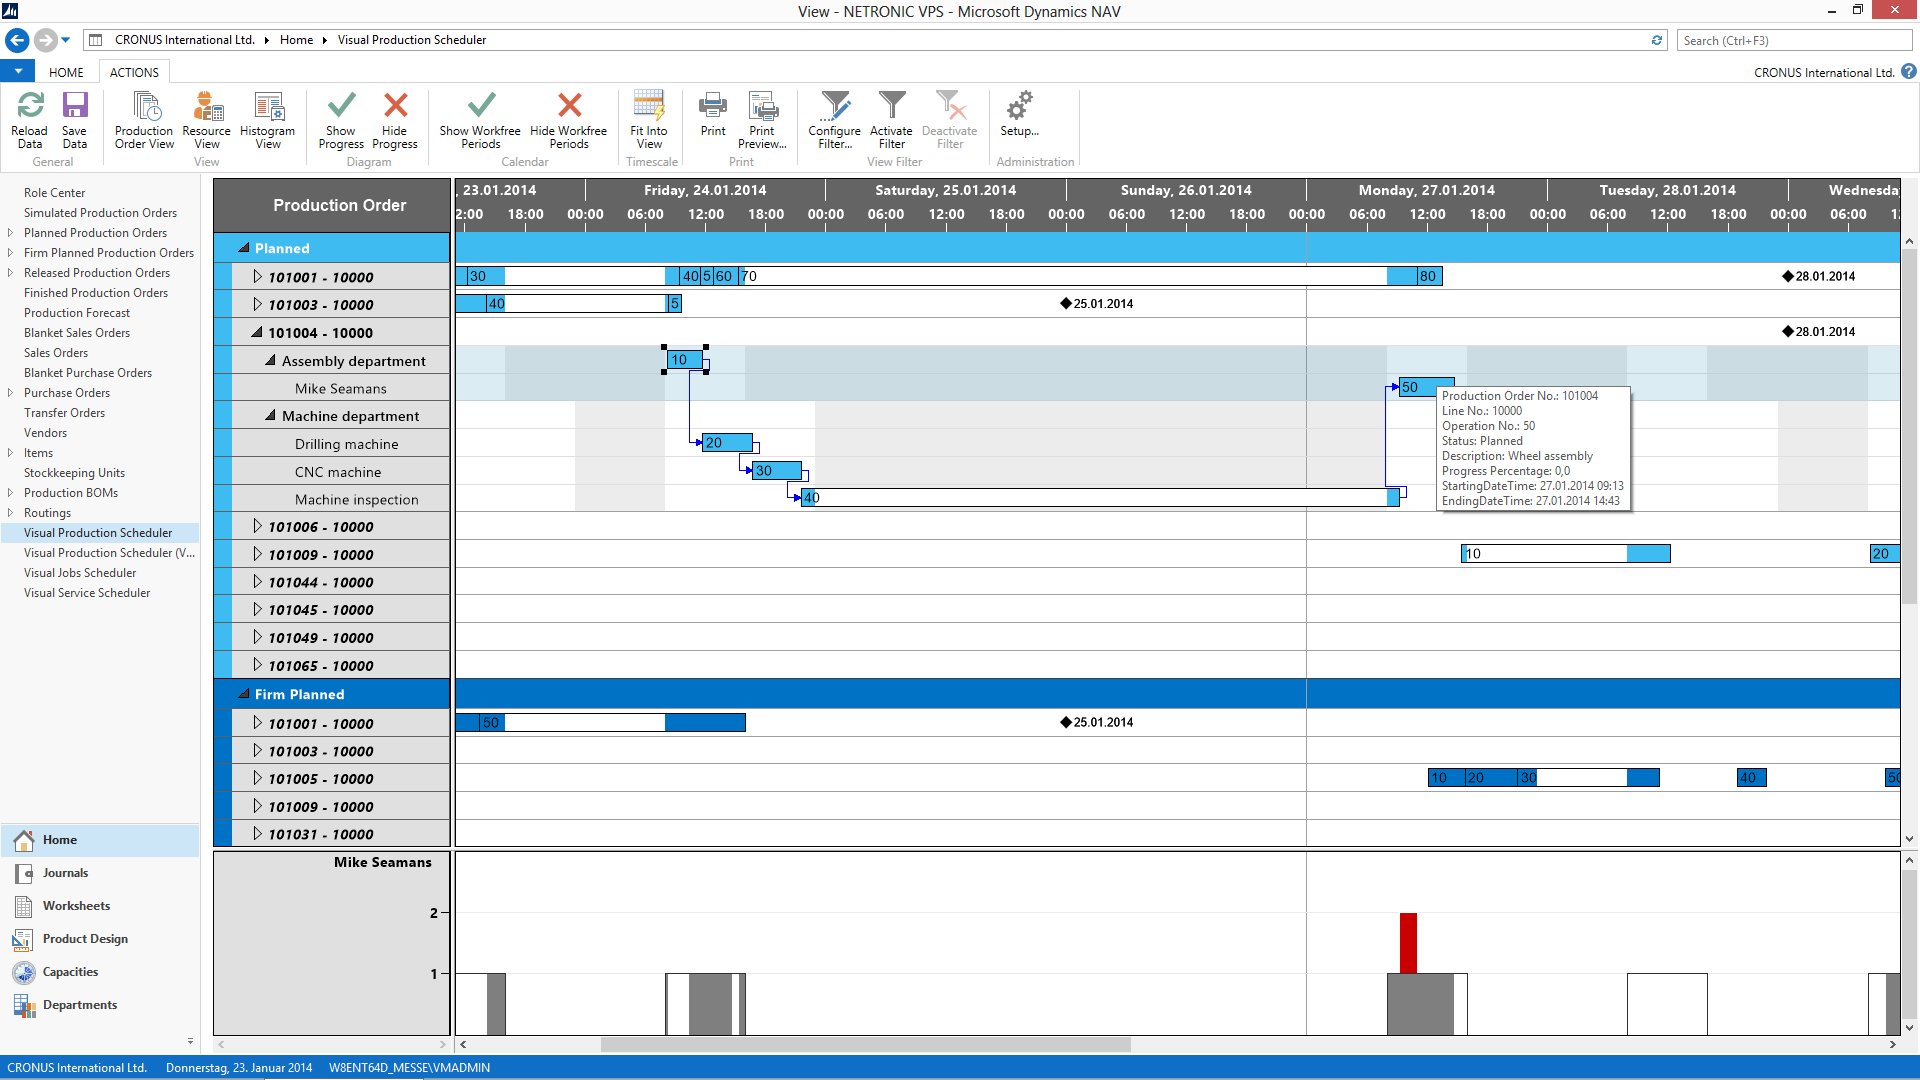 Visual Production Scheduler: Production Order View